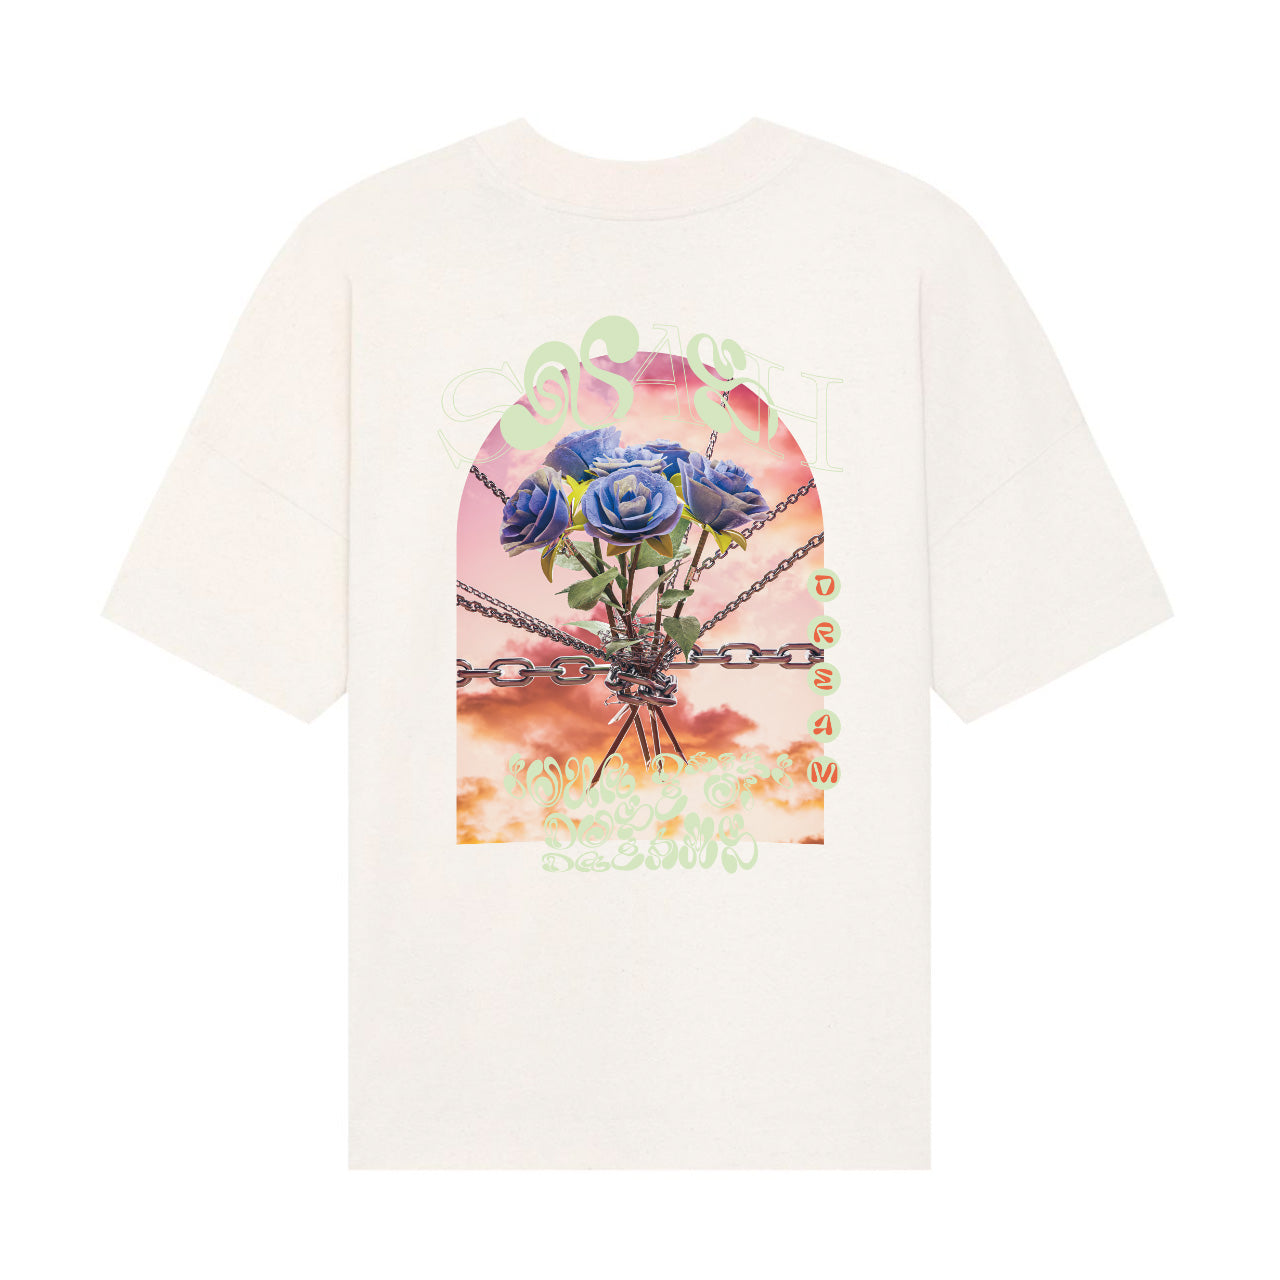 Snash - Chained Flowers T-Shirt